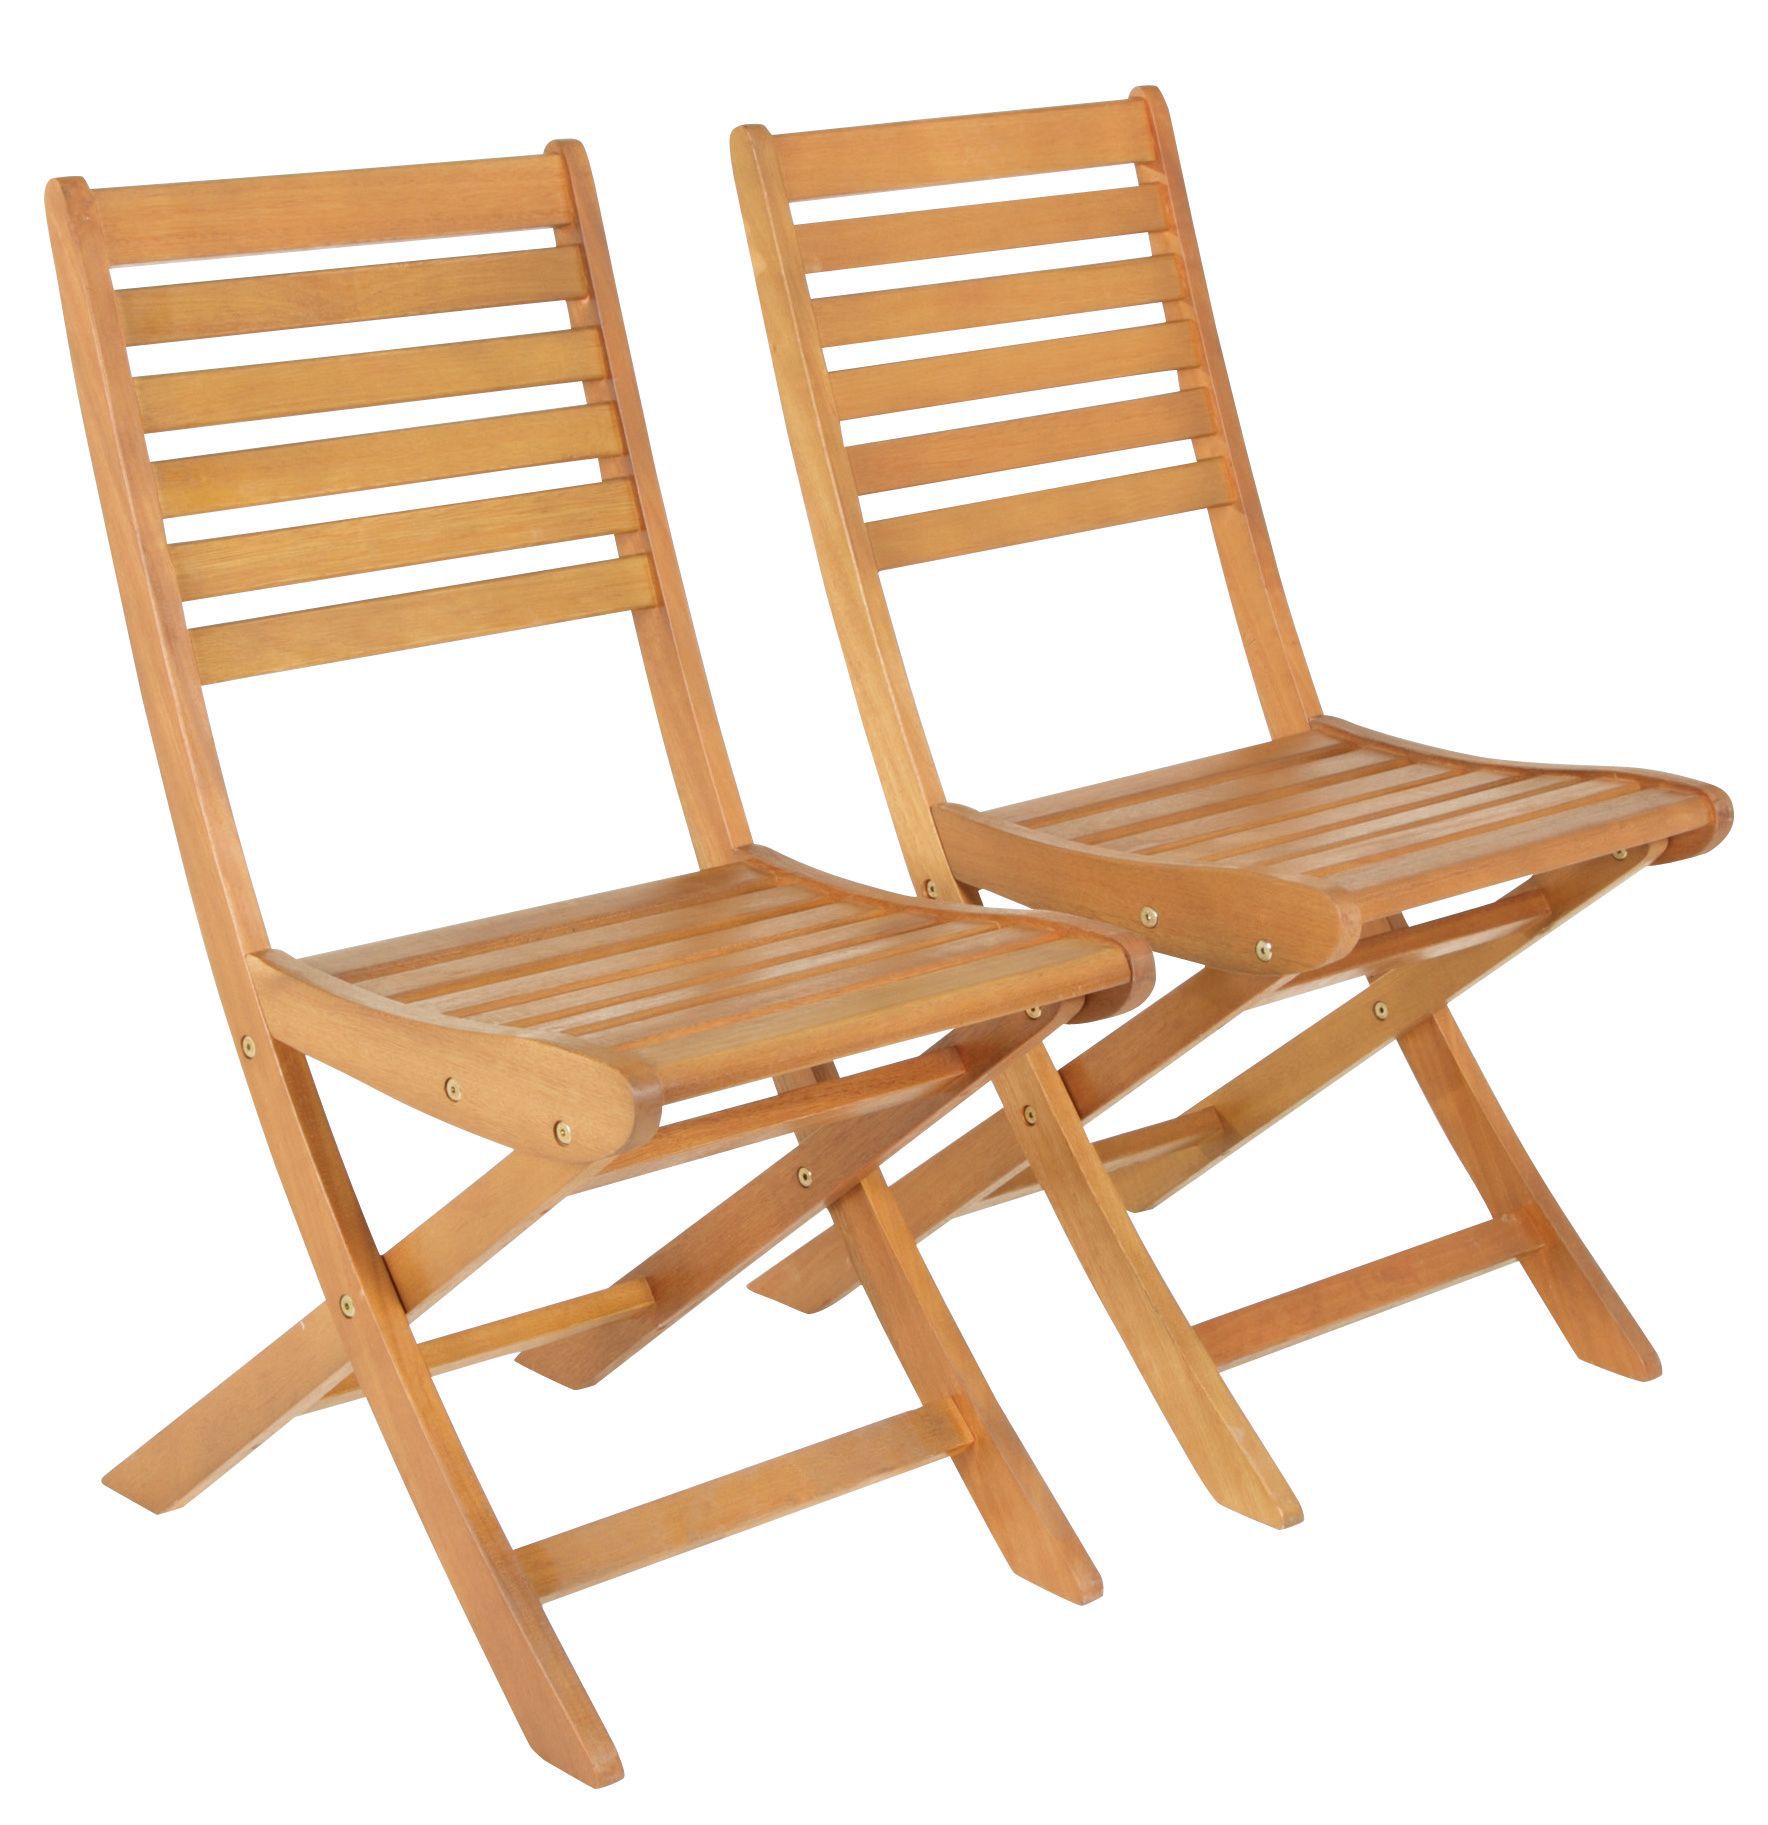 Aland Wooden Dining Chair, Pack of 2 | Departments | DIY at B&Q